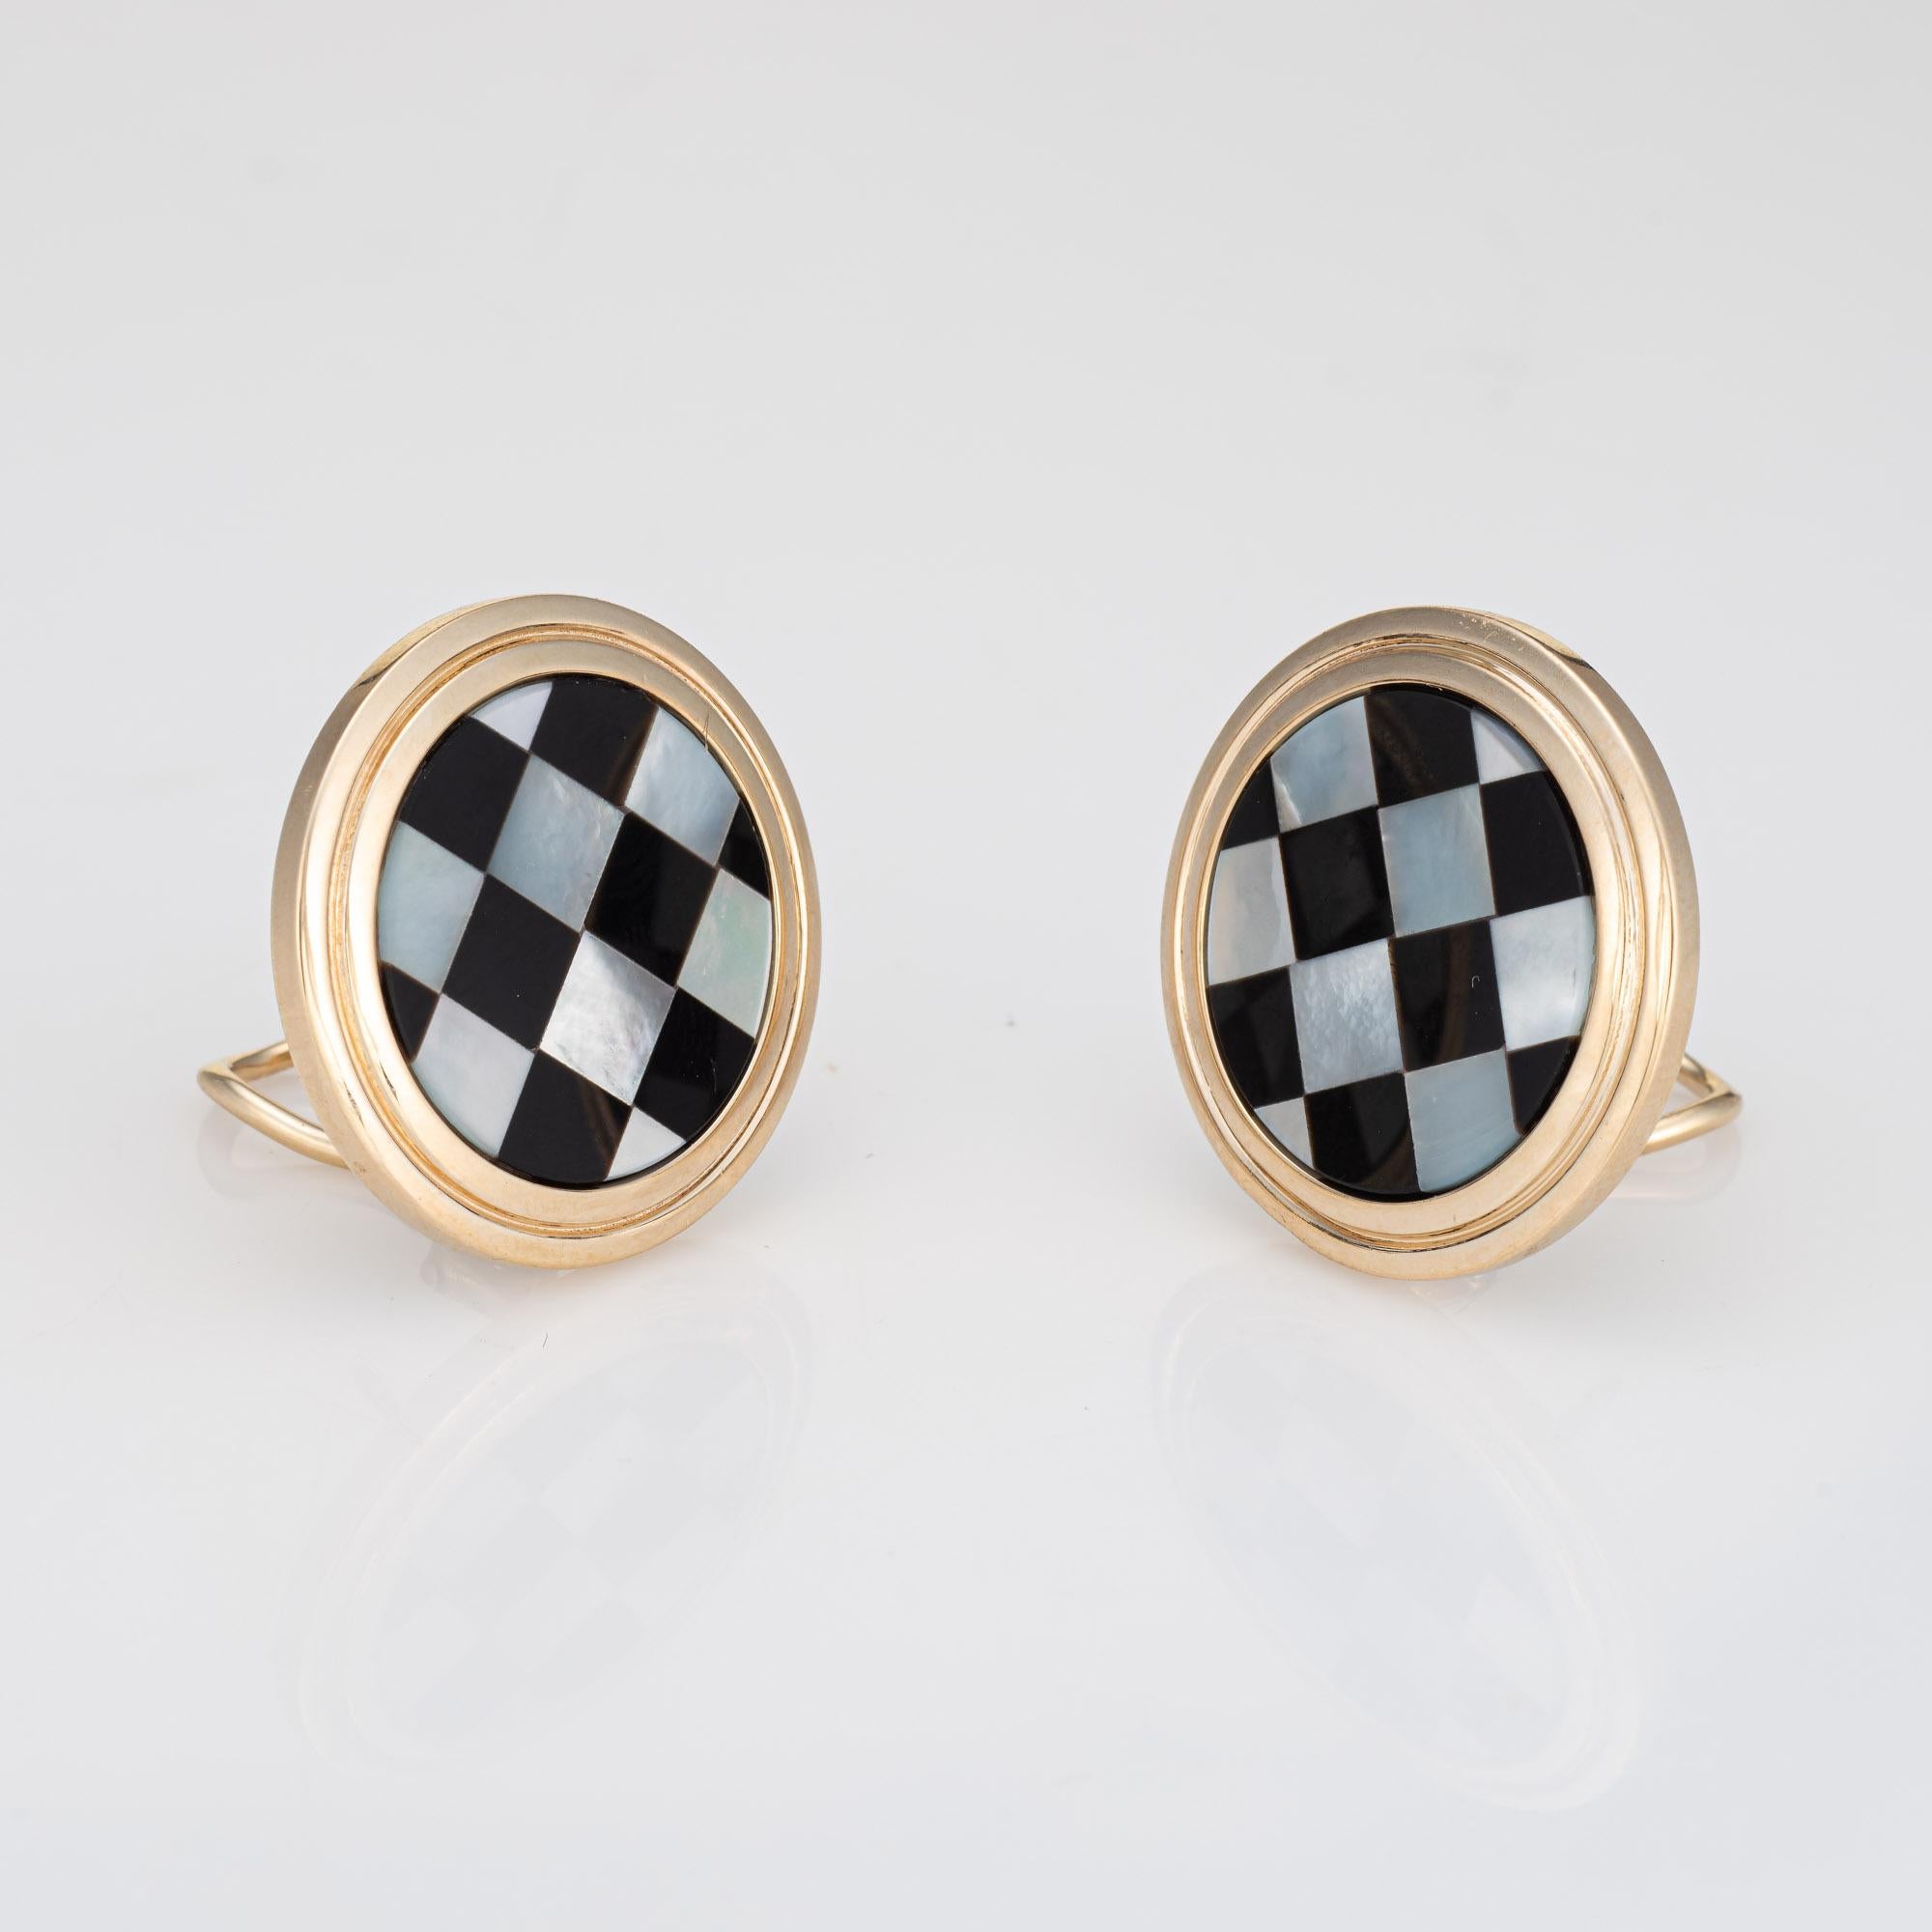 
Stylish pair of Larter & Sons checkerboard earrings crafted in 14k yellow gold (circa 1970s to 1980s). 

Onyx and mother of pearl is inlaid into the mounts. 

The striking earrings are inlaid flush with luminous mother of pearl and black onyx in a